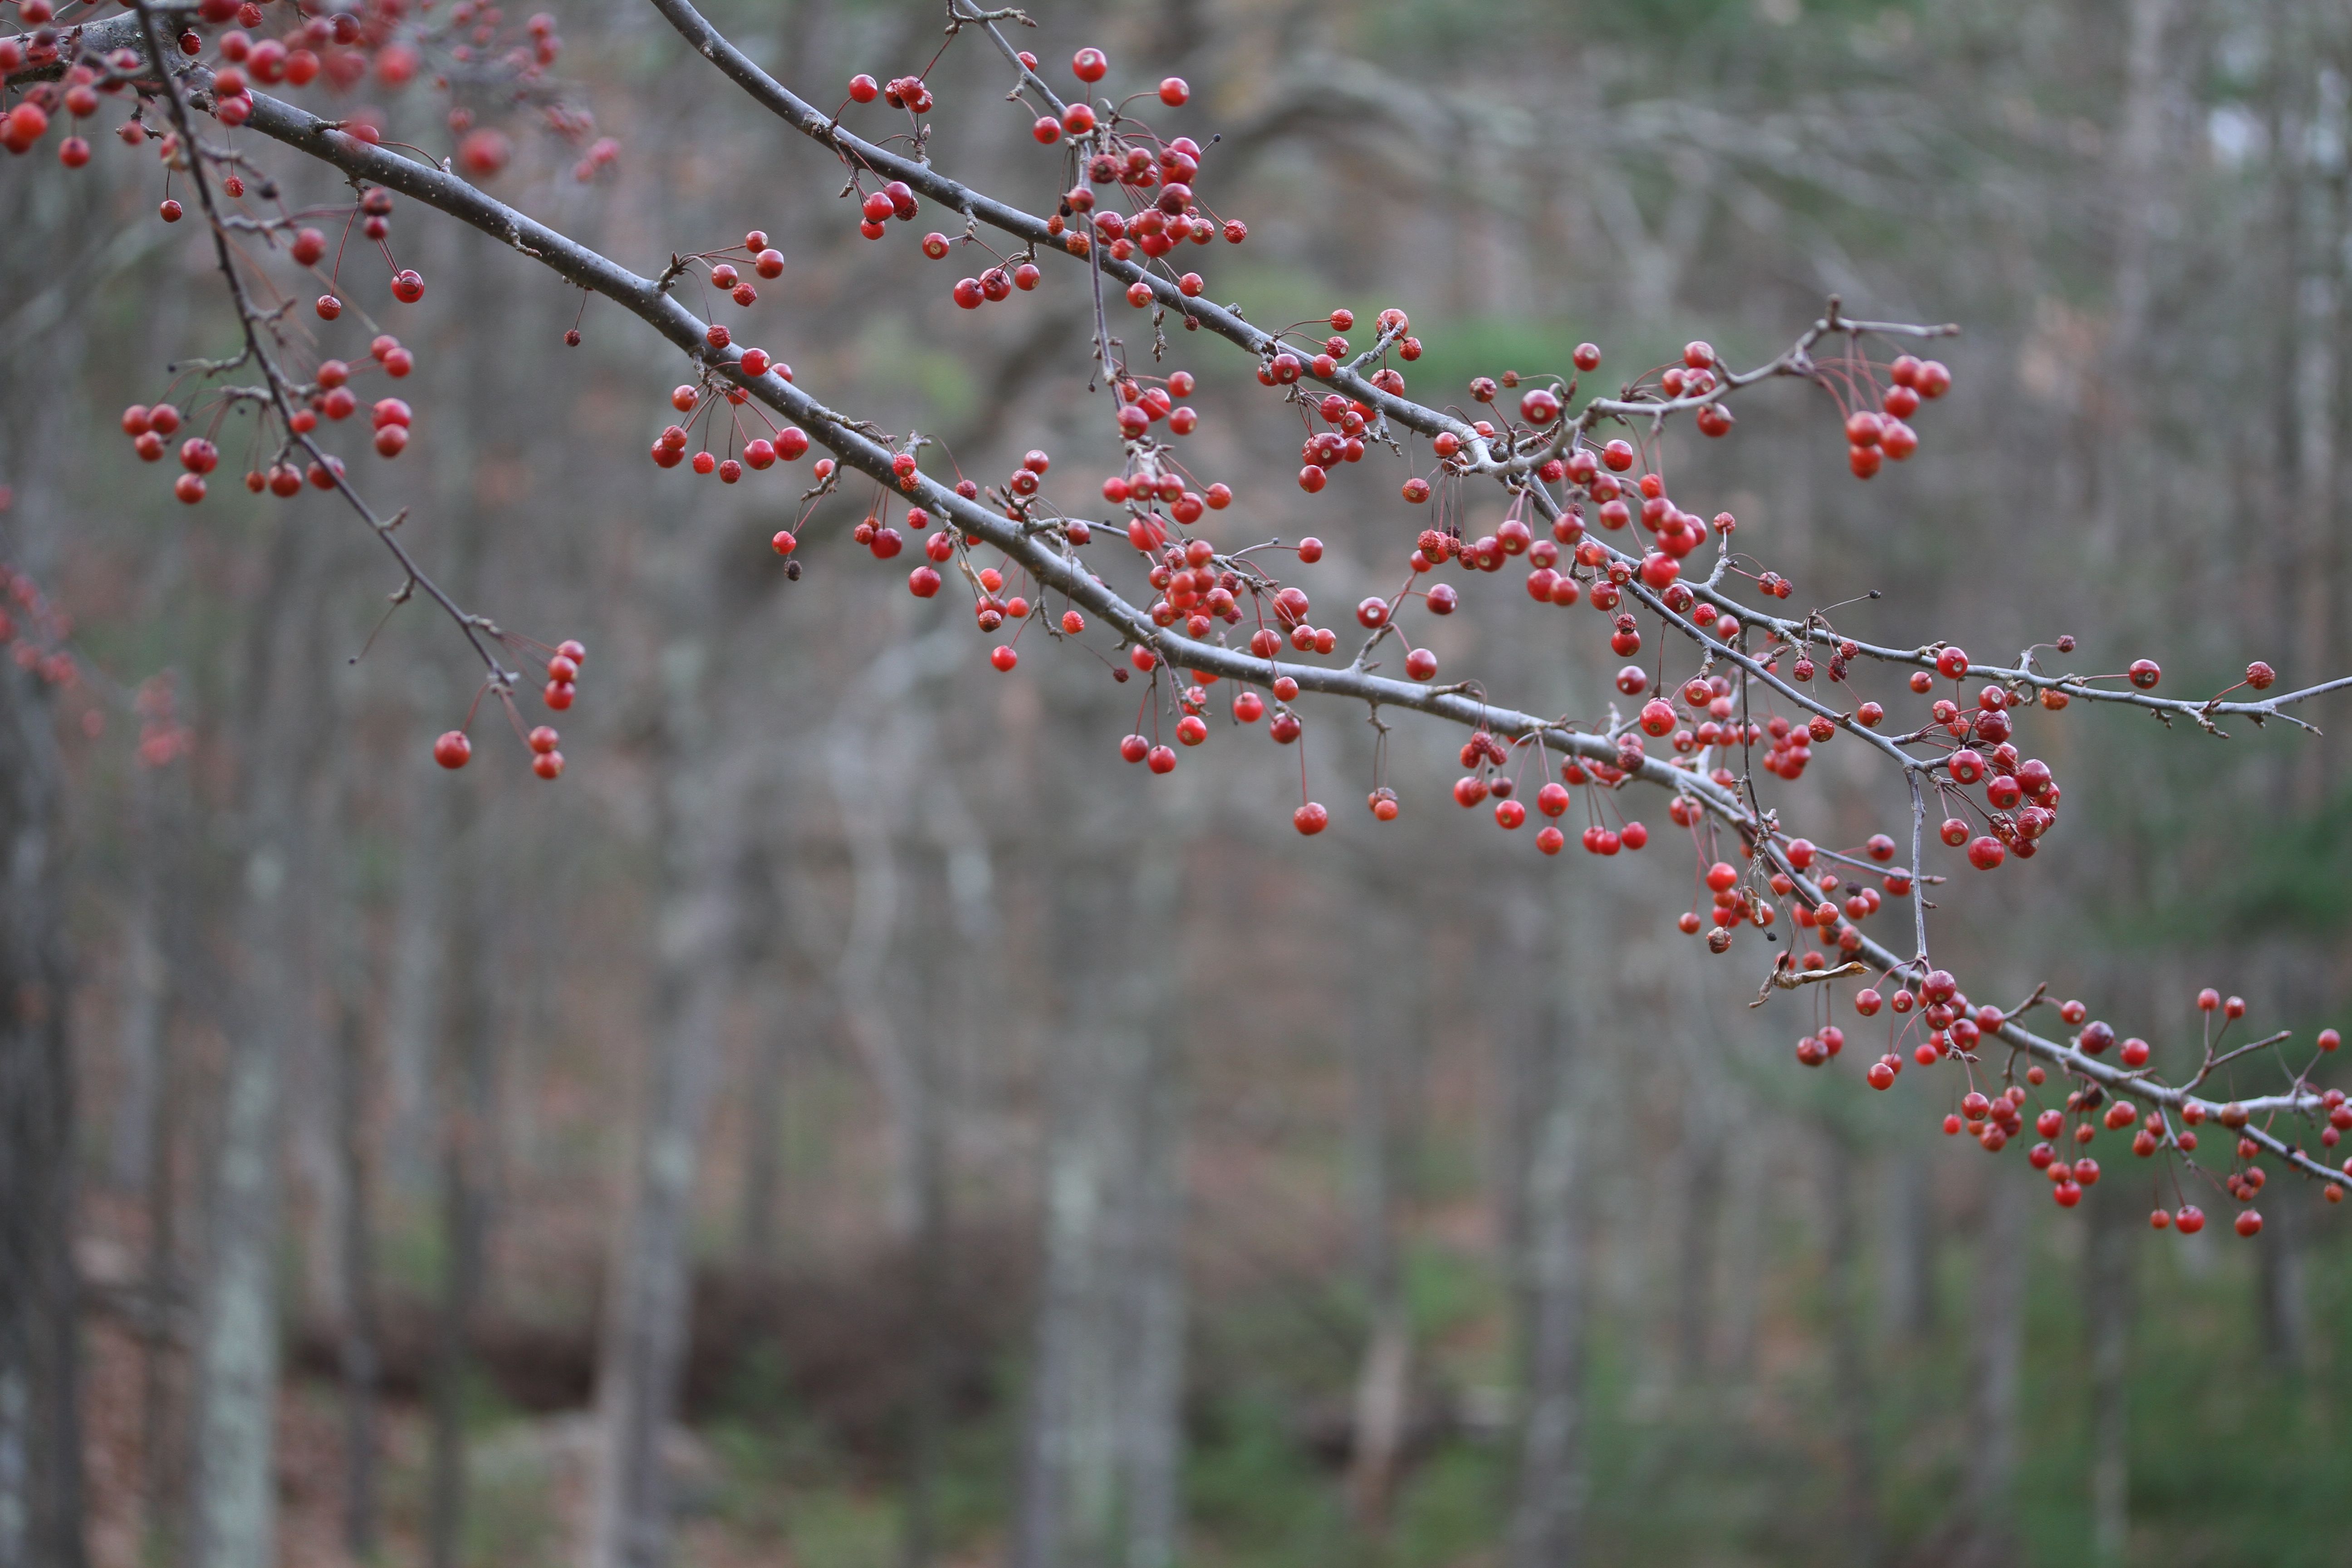 I have no idea what these trees are called, or what the berries are. I just know they're pretty.